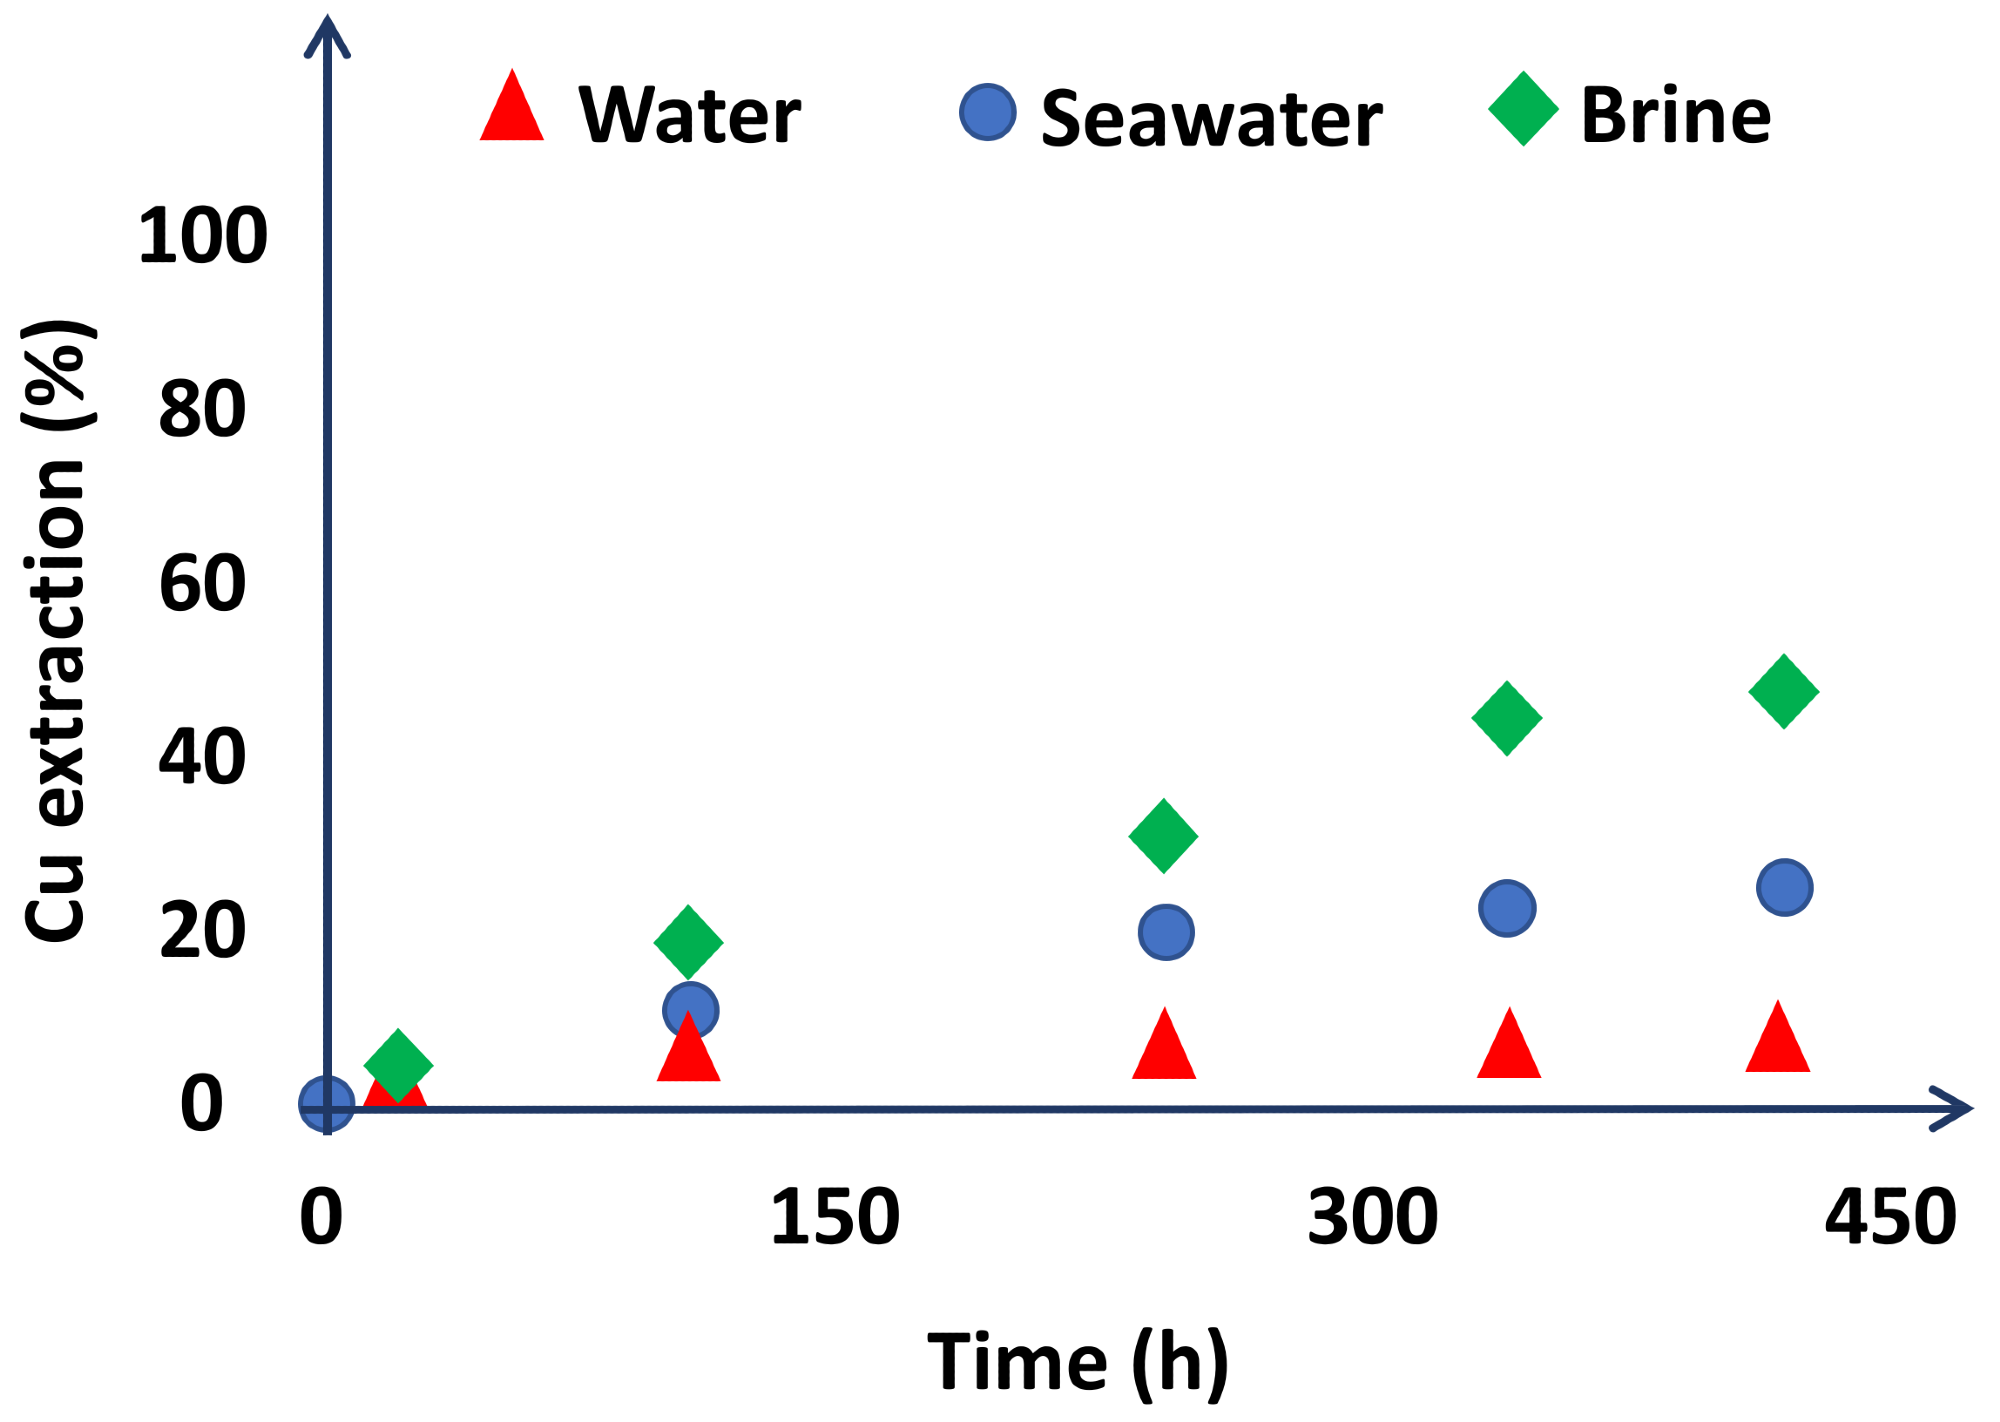 Copper extraction (%) versus time (h) when different dissolvents were used: distilled water (water), seawater, and brine. Experimental conditions: [NaNO3] = 0.7 M, [H2SO4] = 0.7 M, -150 + 75 µm, S/L ratio 2 g/L, 45 °C, 350 rpm, sample A.